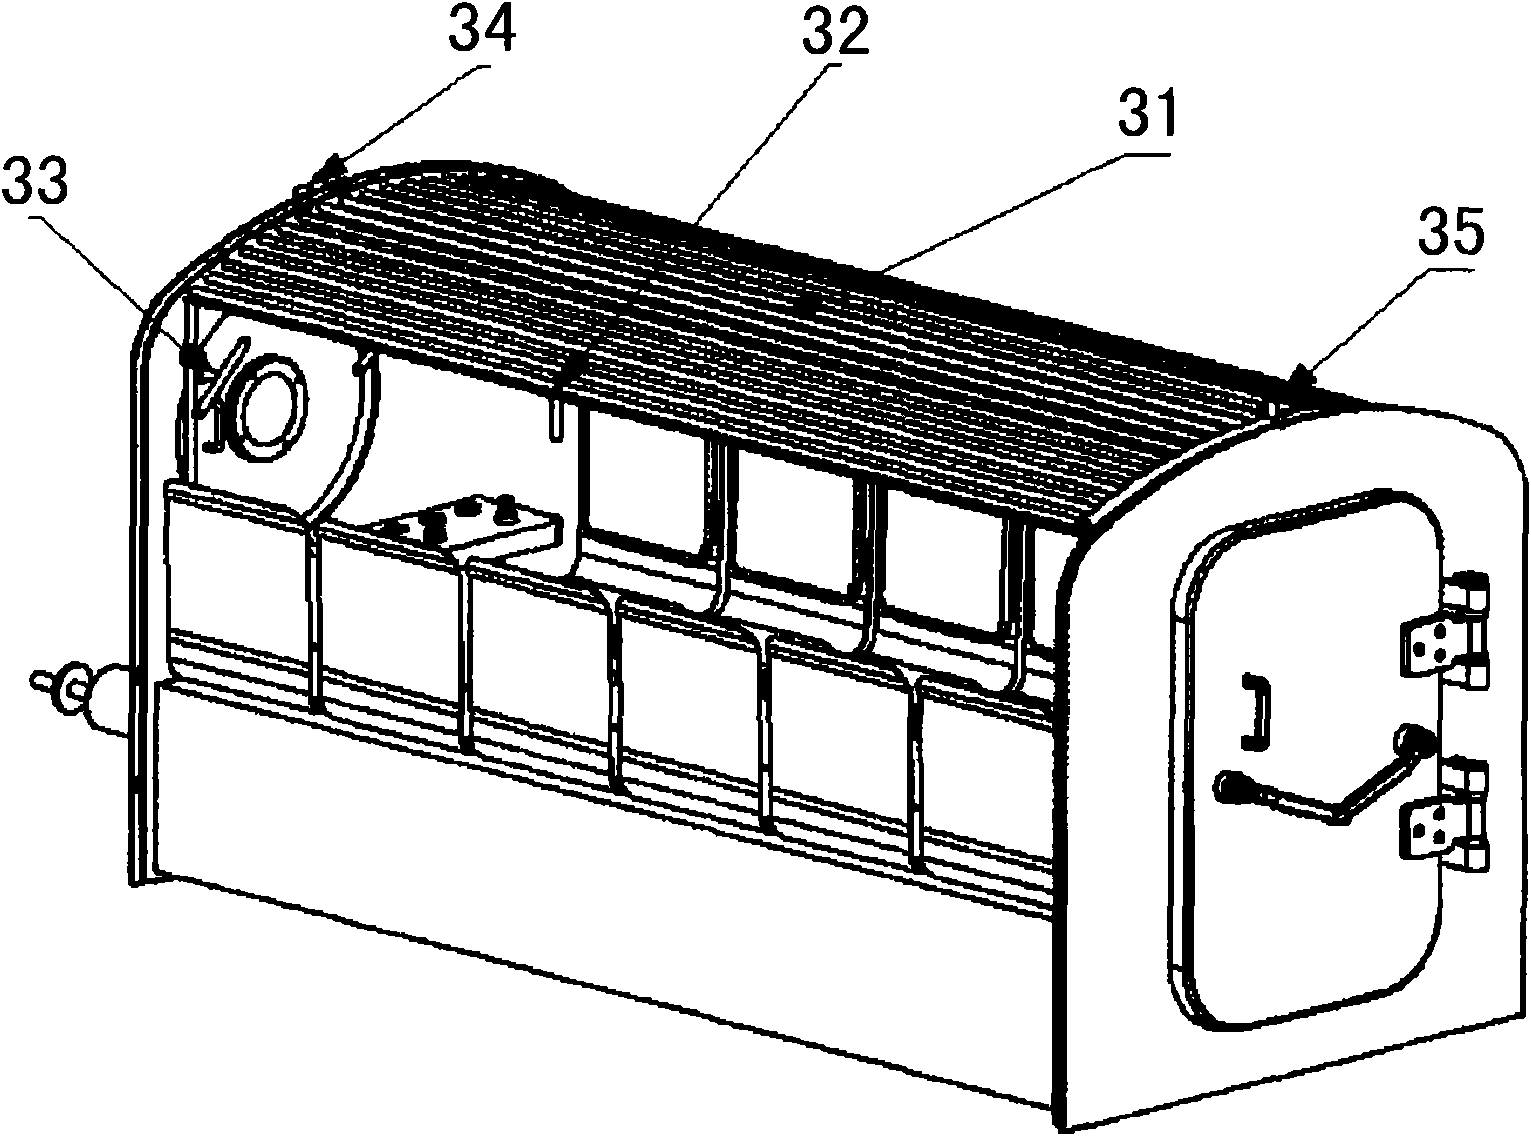 Device for controlling ambient temperature in rescue capsule